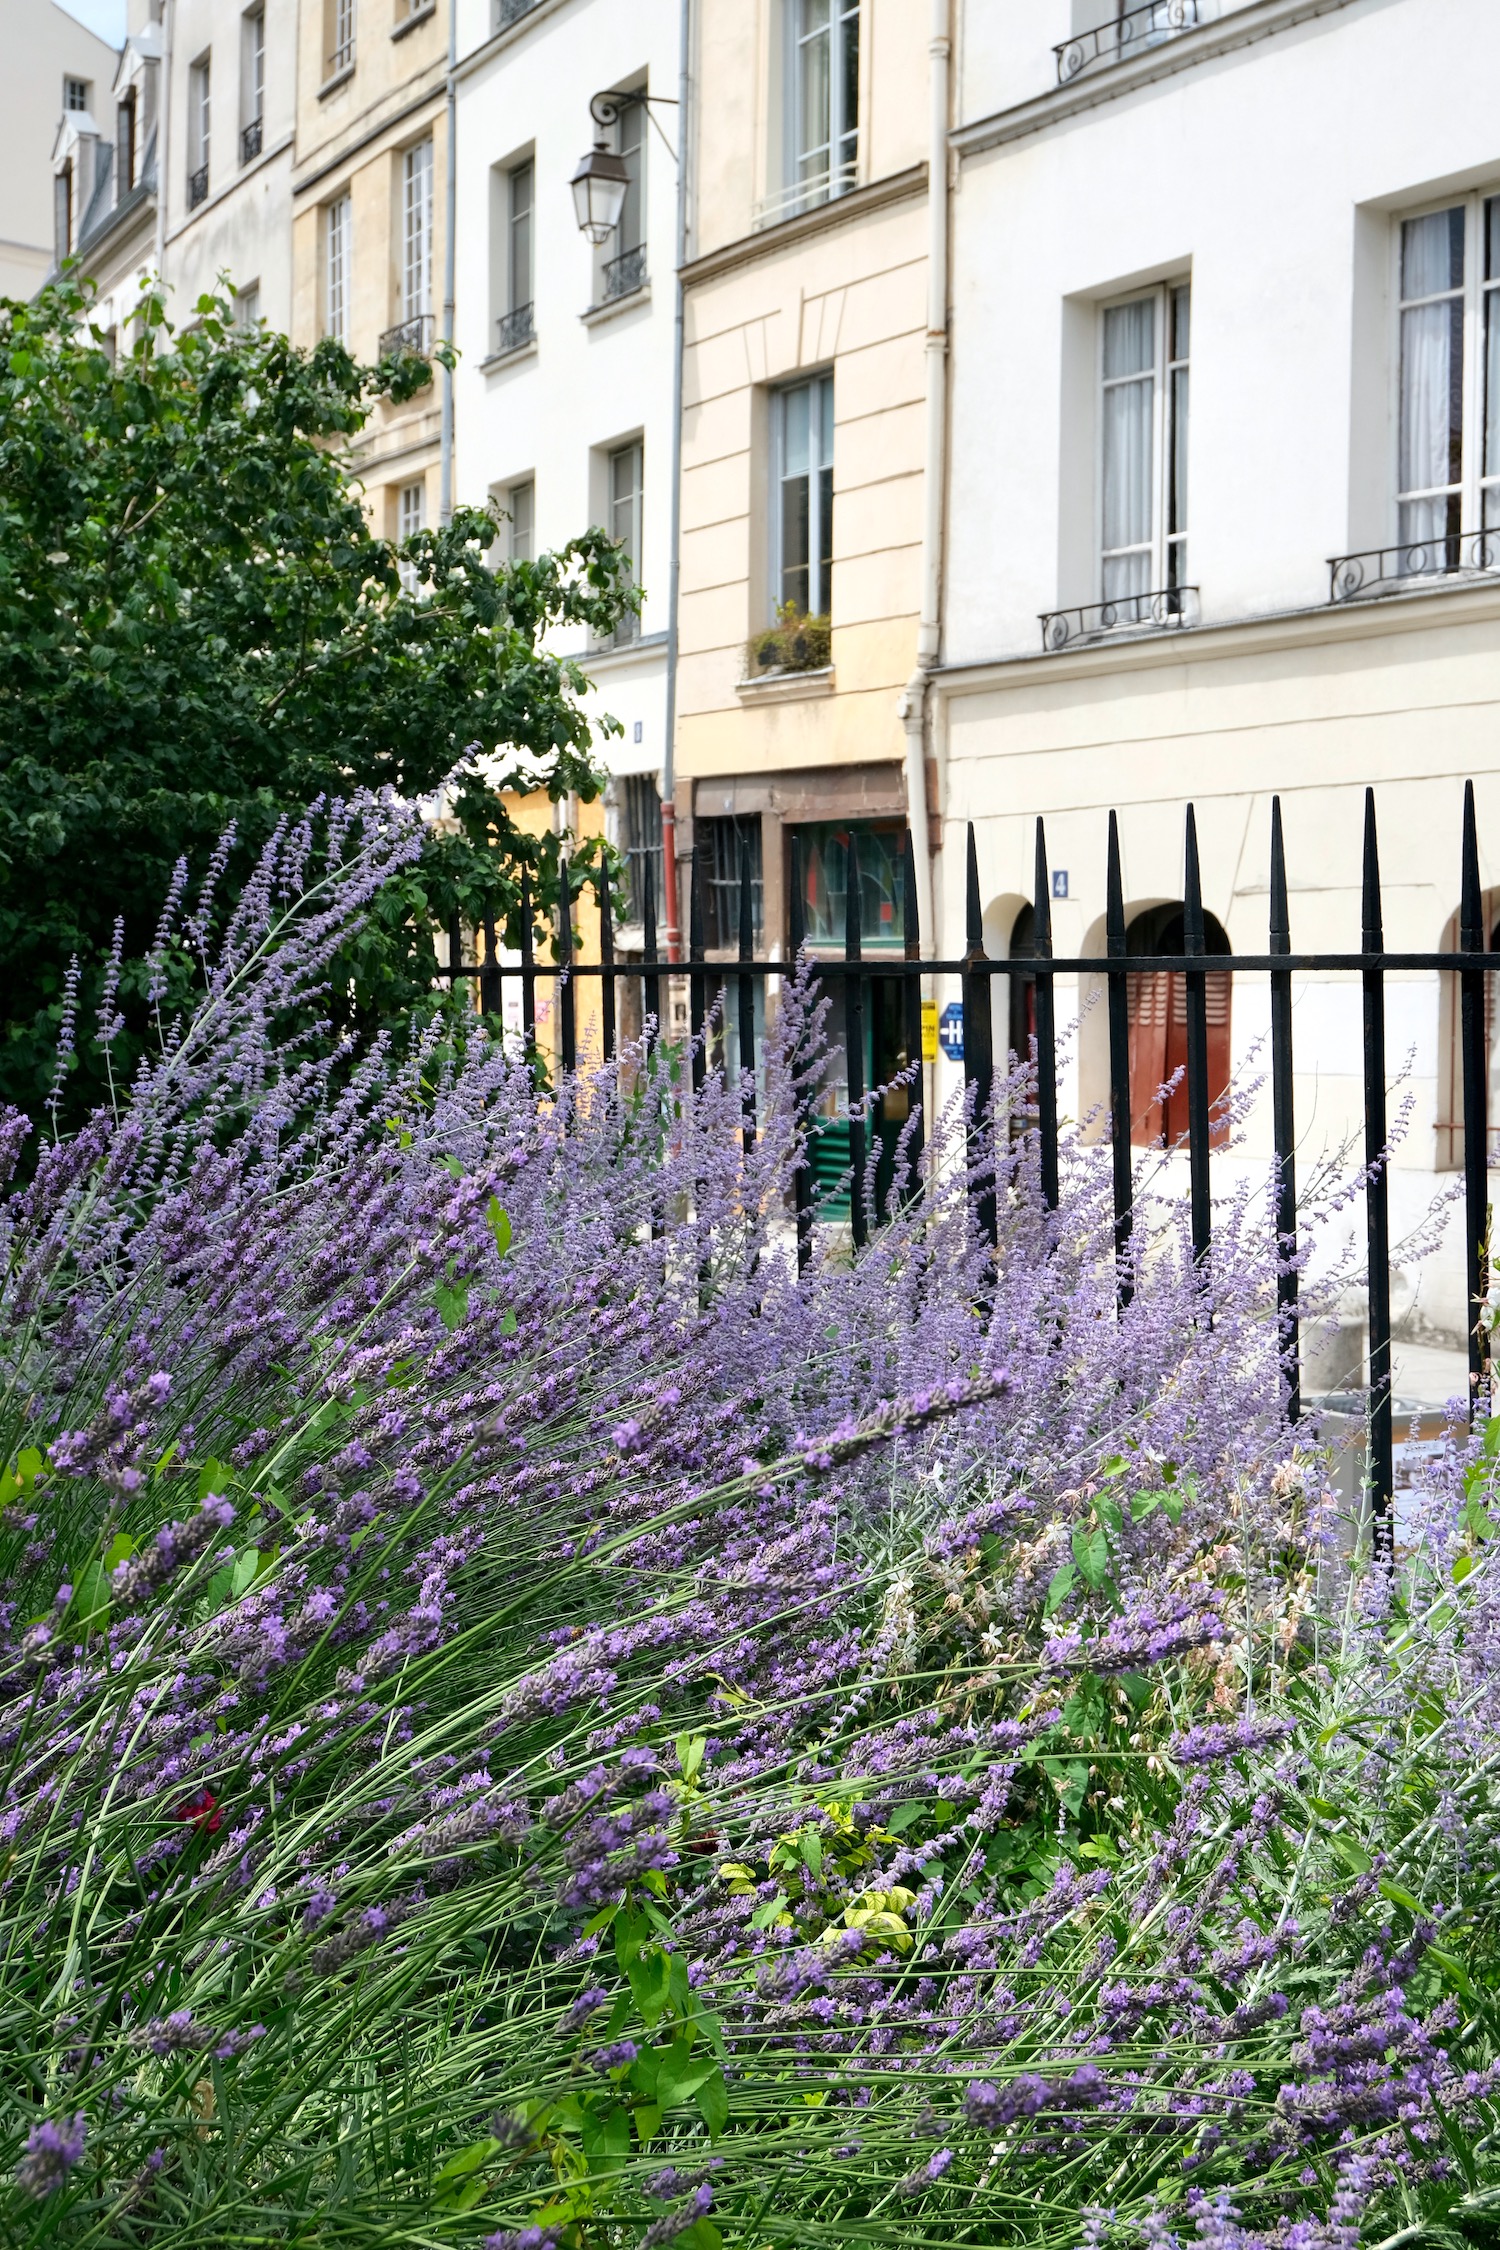 Provence in Paris: Where to See Lavender in Paris